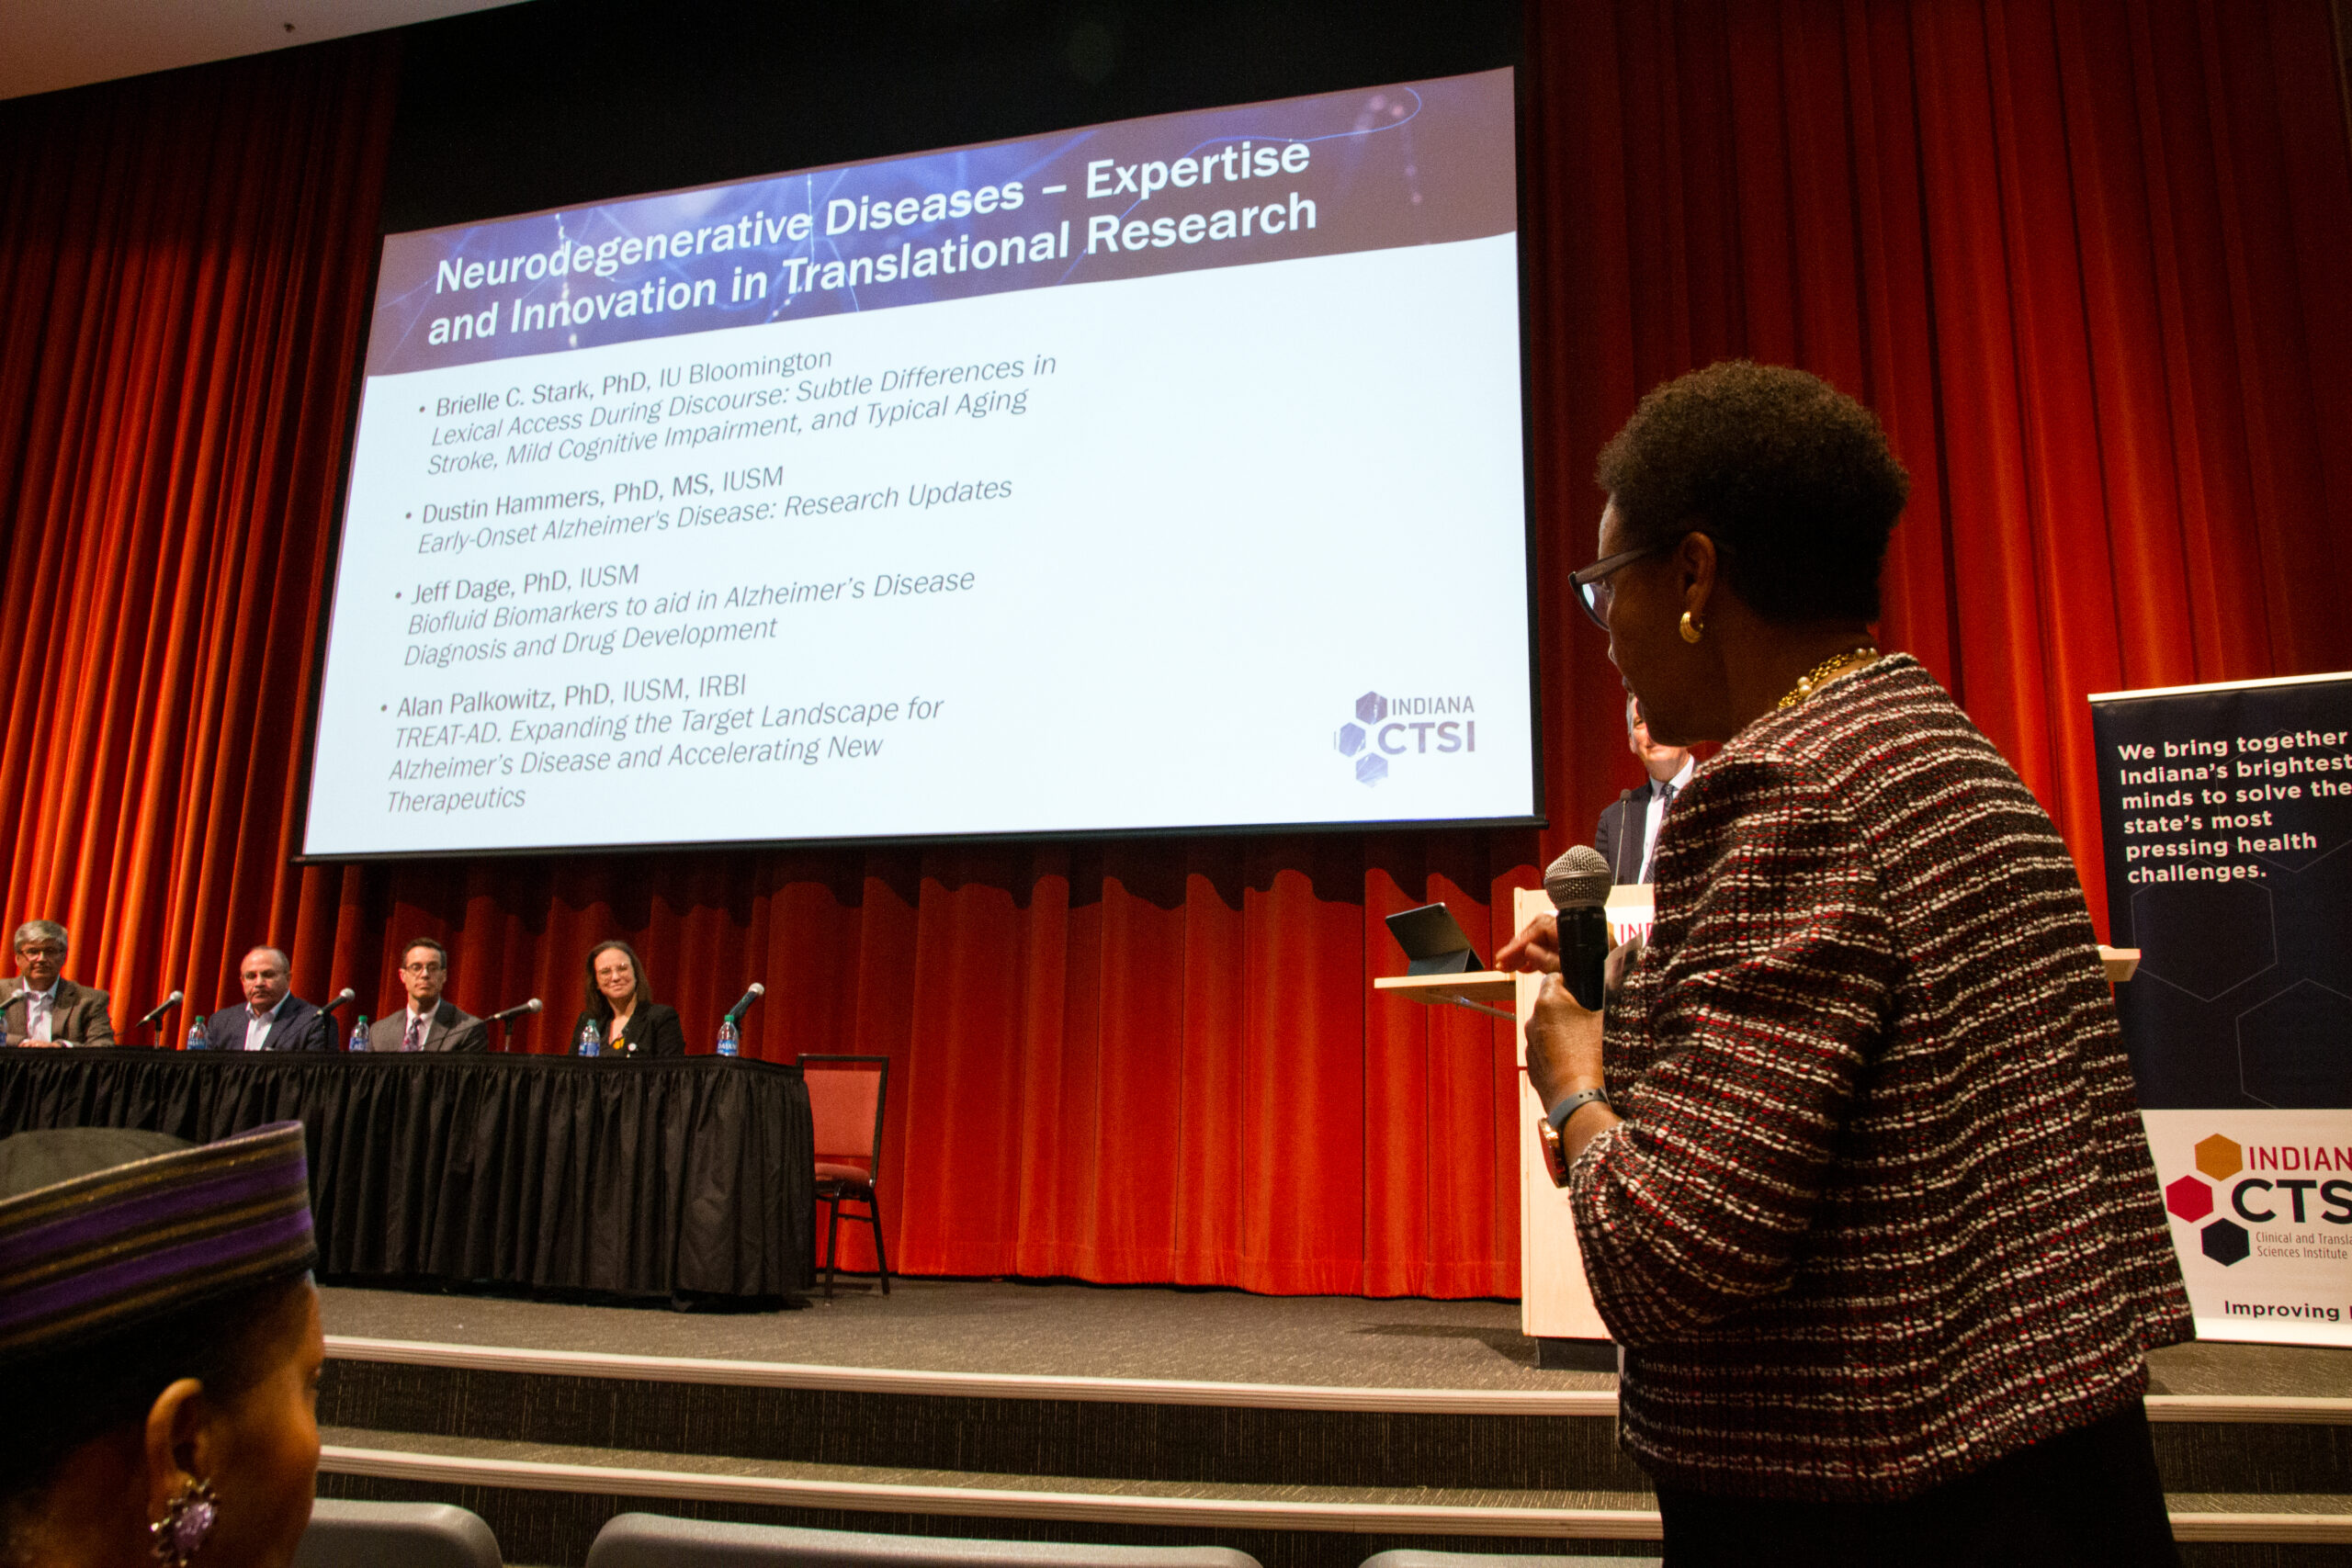 Peggye Dilworth-Anderson asks the panel a question during the Q and A portion of the presentation